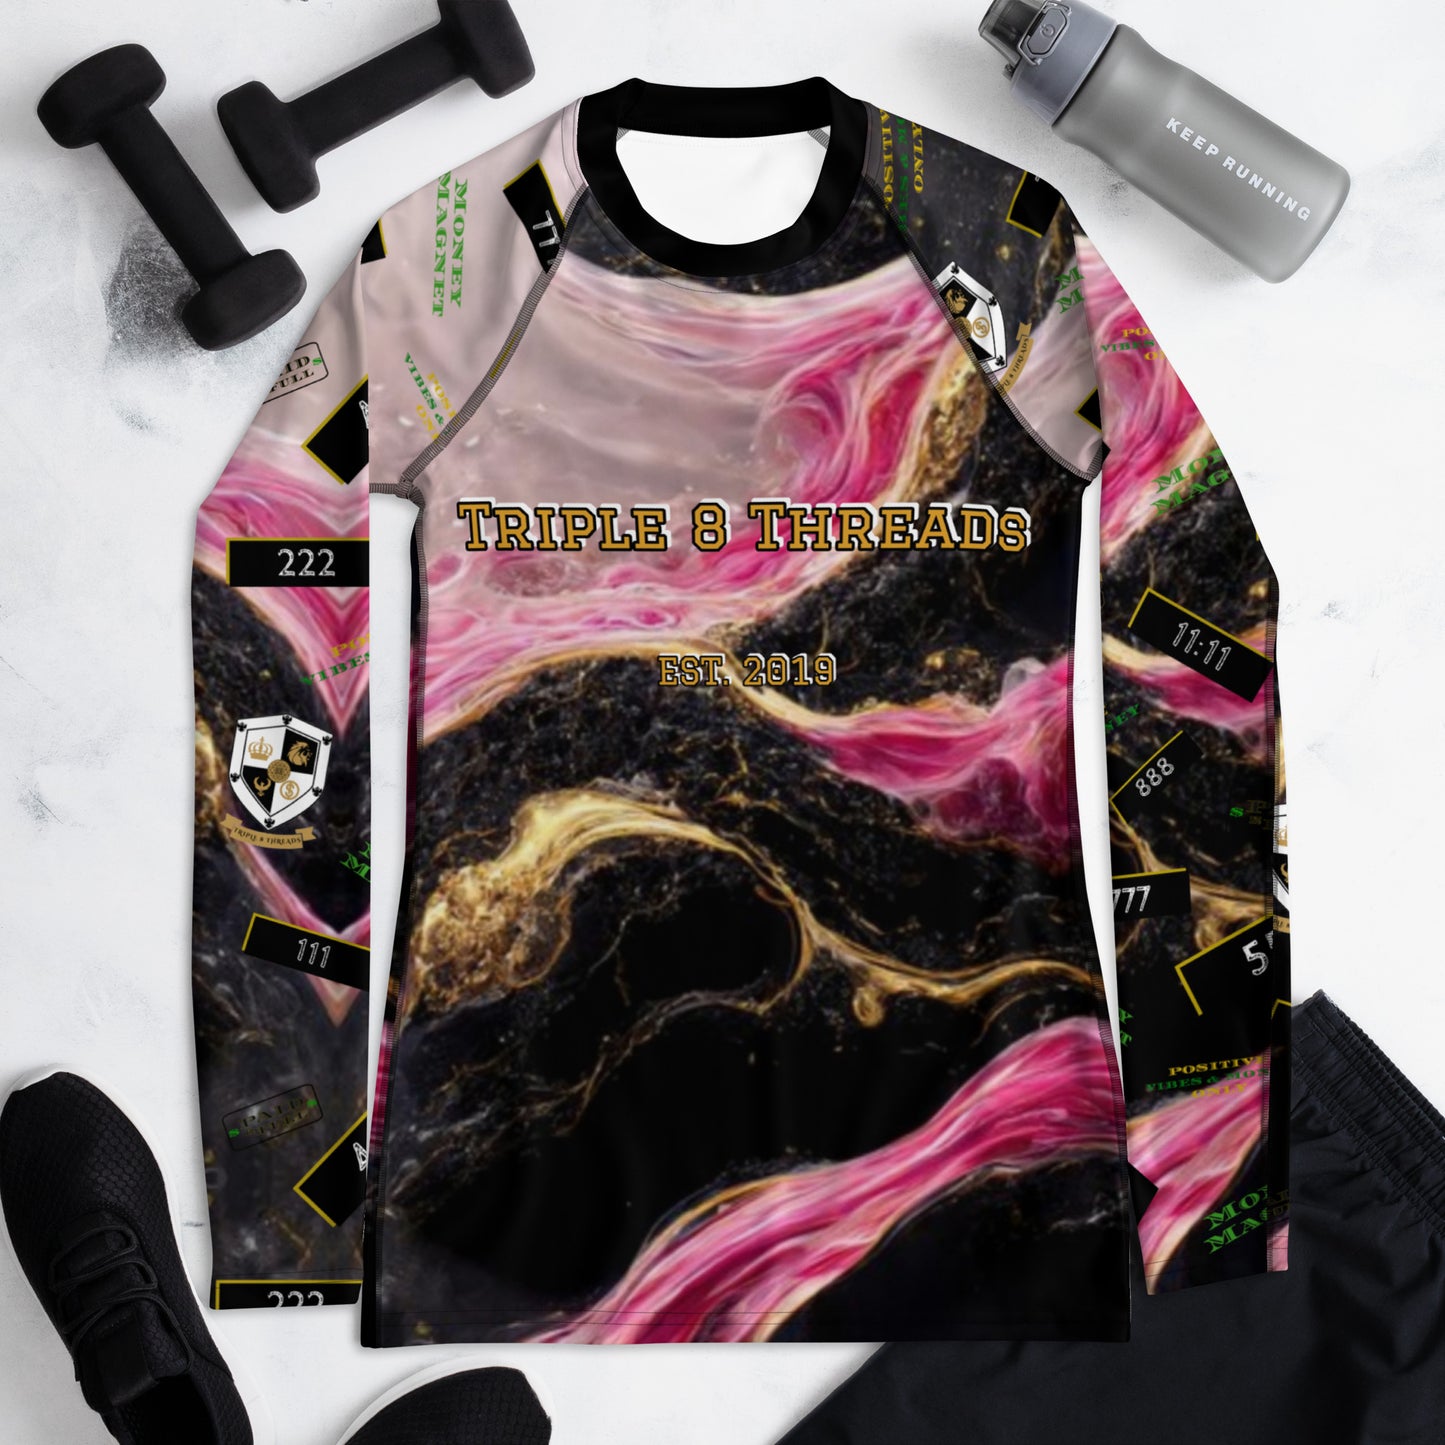 8xquiZit Collection - Women's Manifestation Pynk, Black, N Gold Marble Long Sleeve Activewear